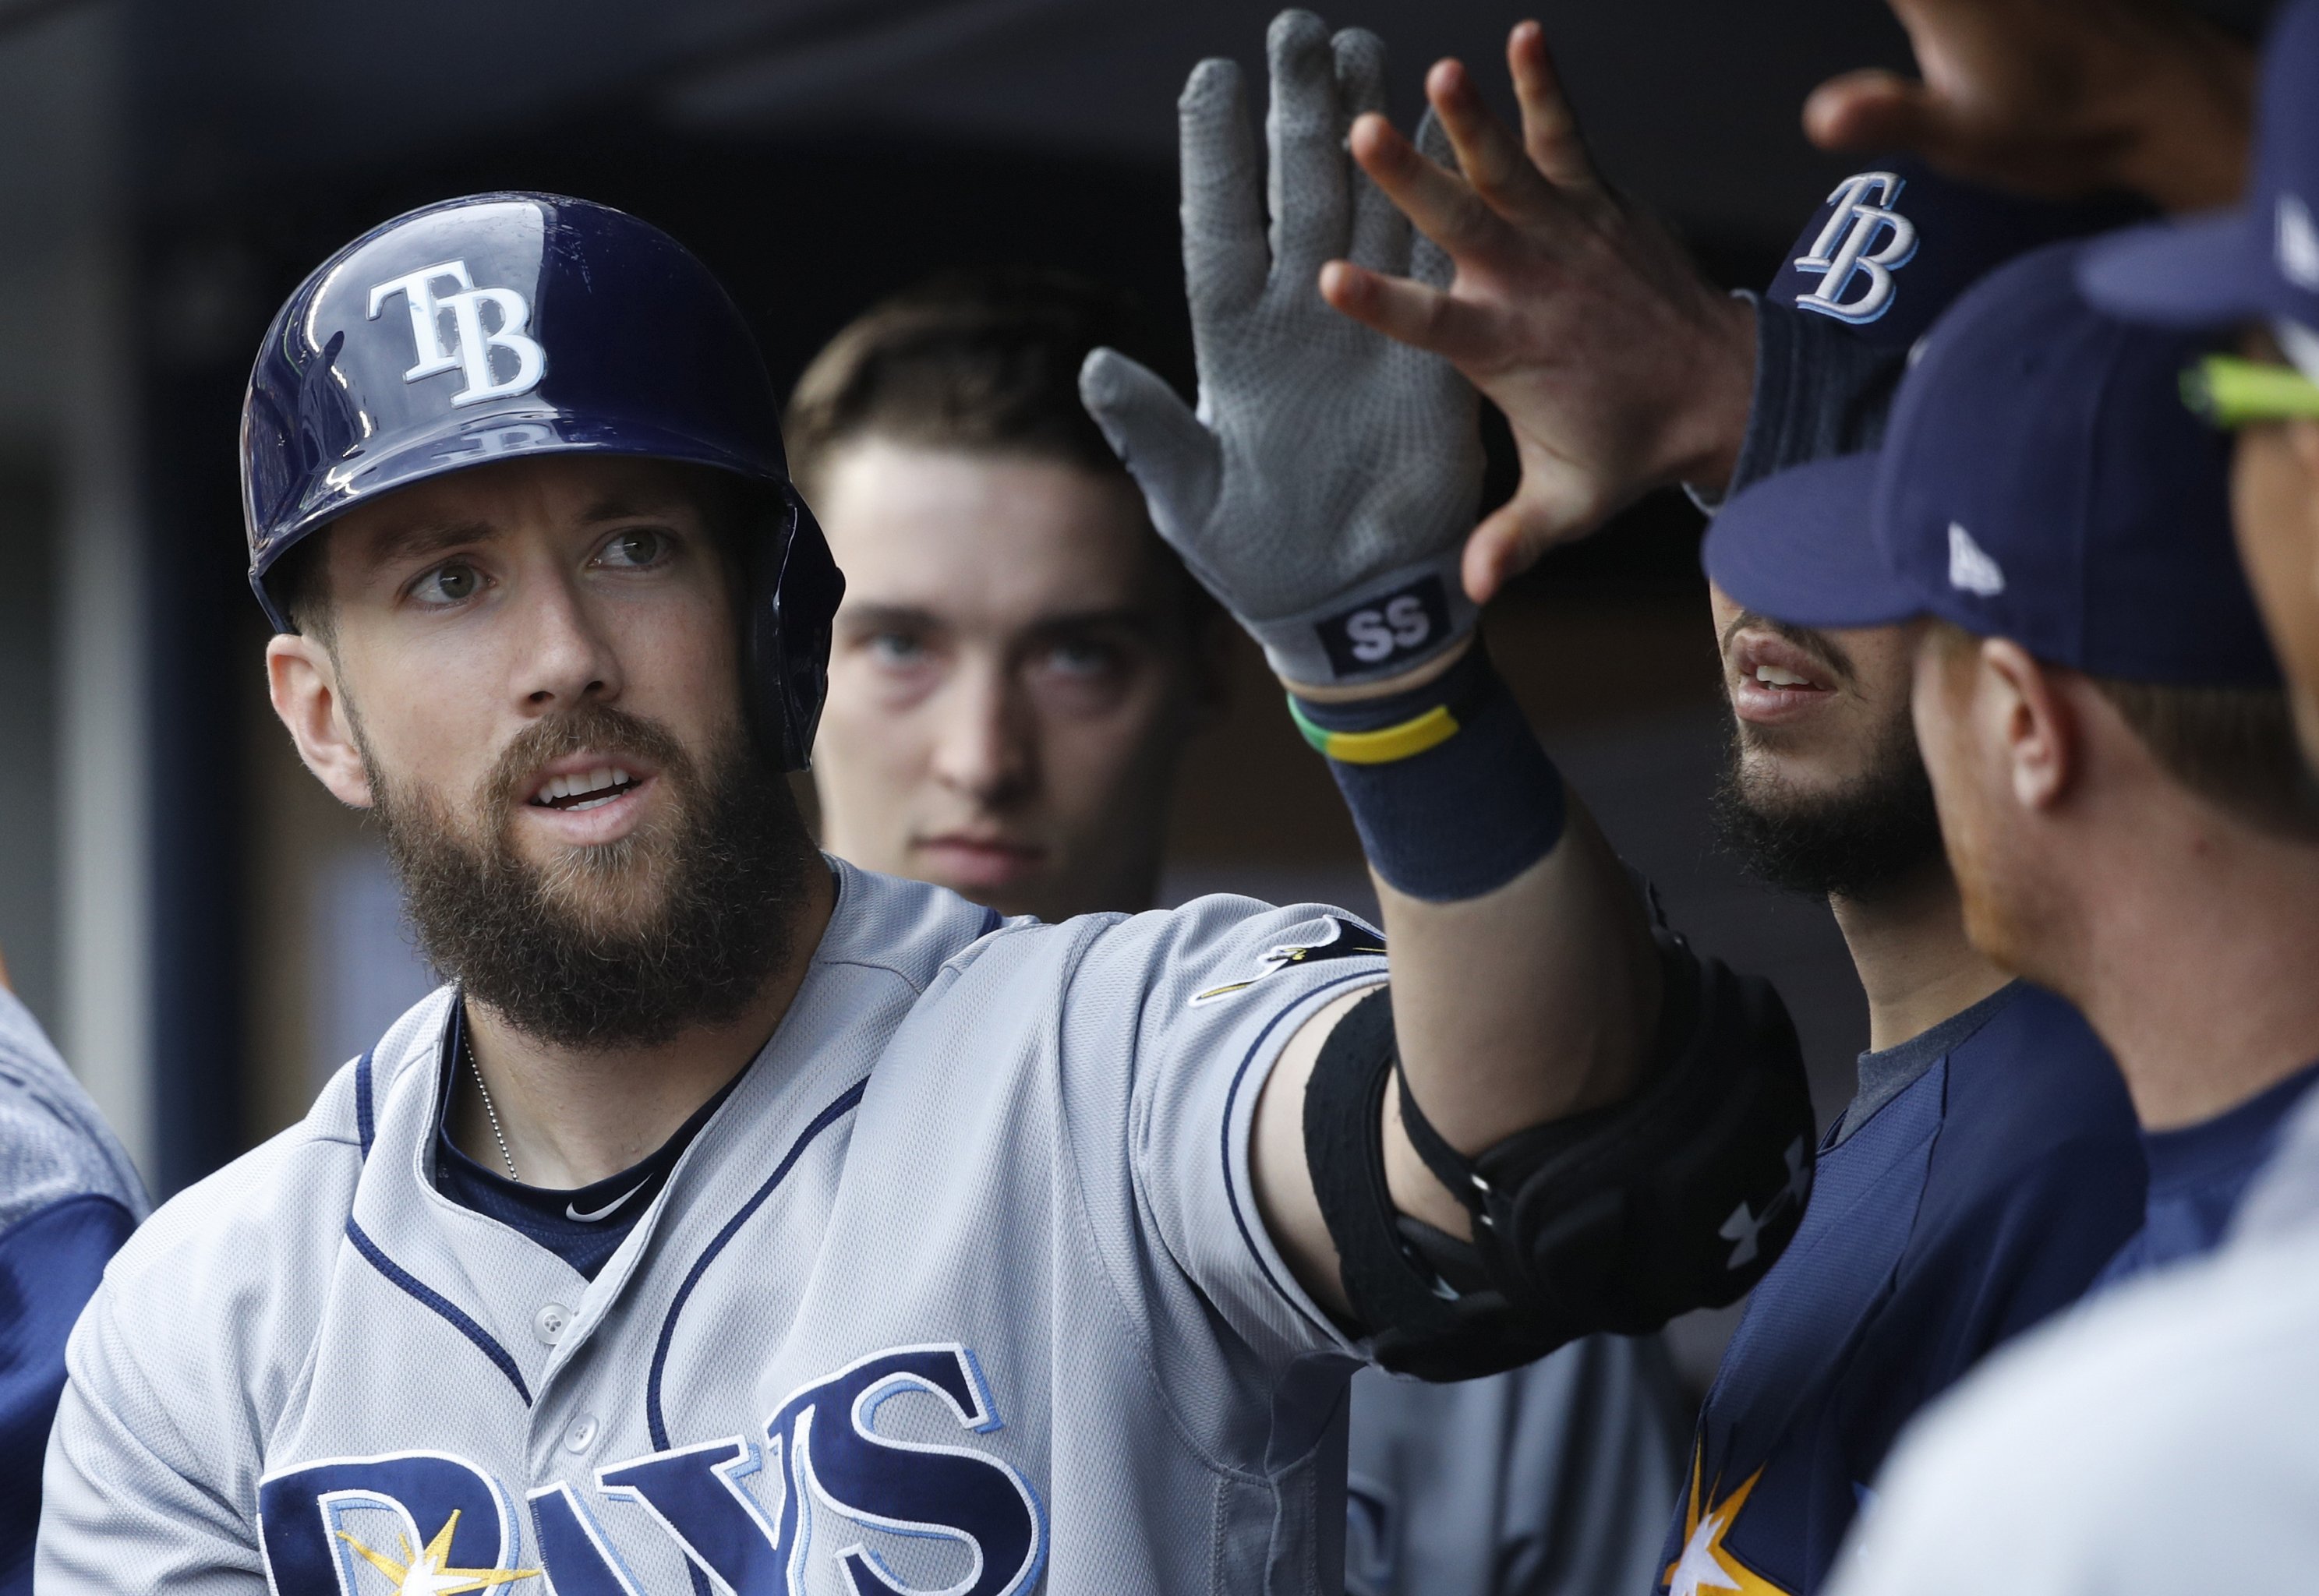 Tampa Bay Rays History: Wil Myers traded to Padres, Steven Souza